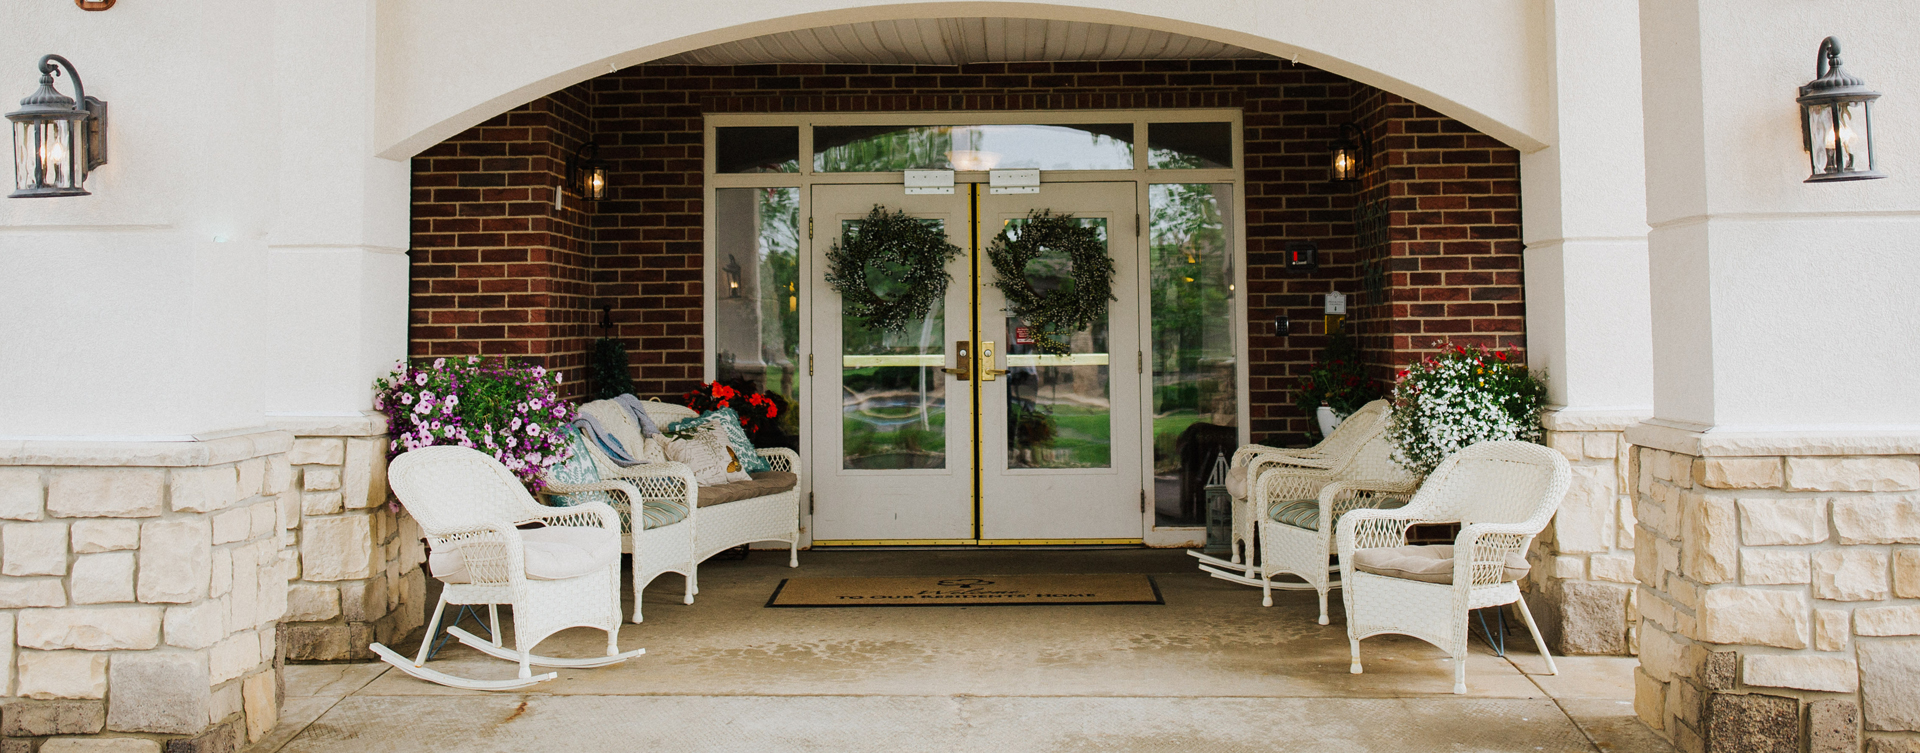 Sip on your favorite drink on the porch at Bickford of Bourbonnais